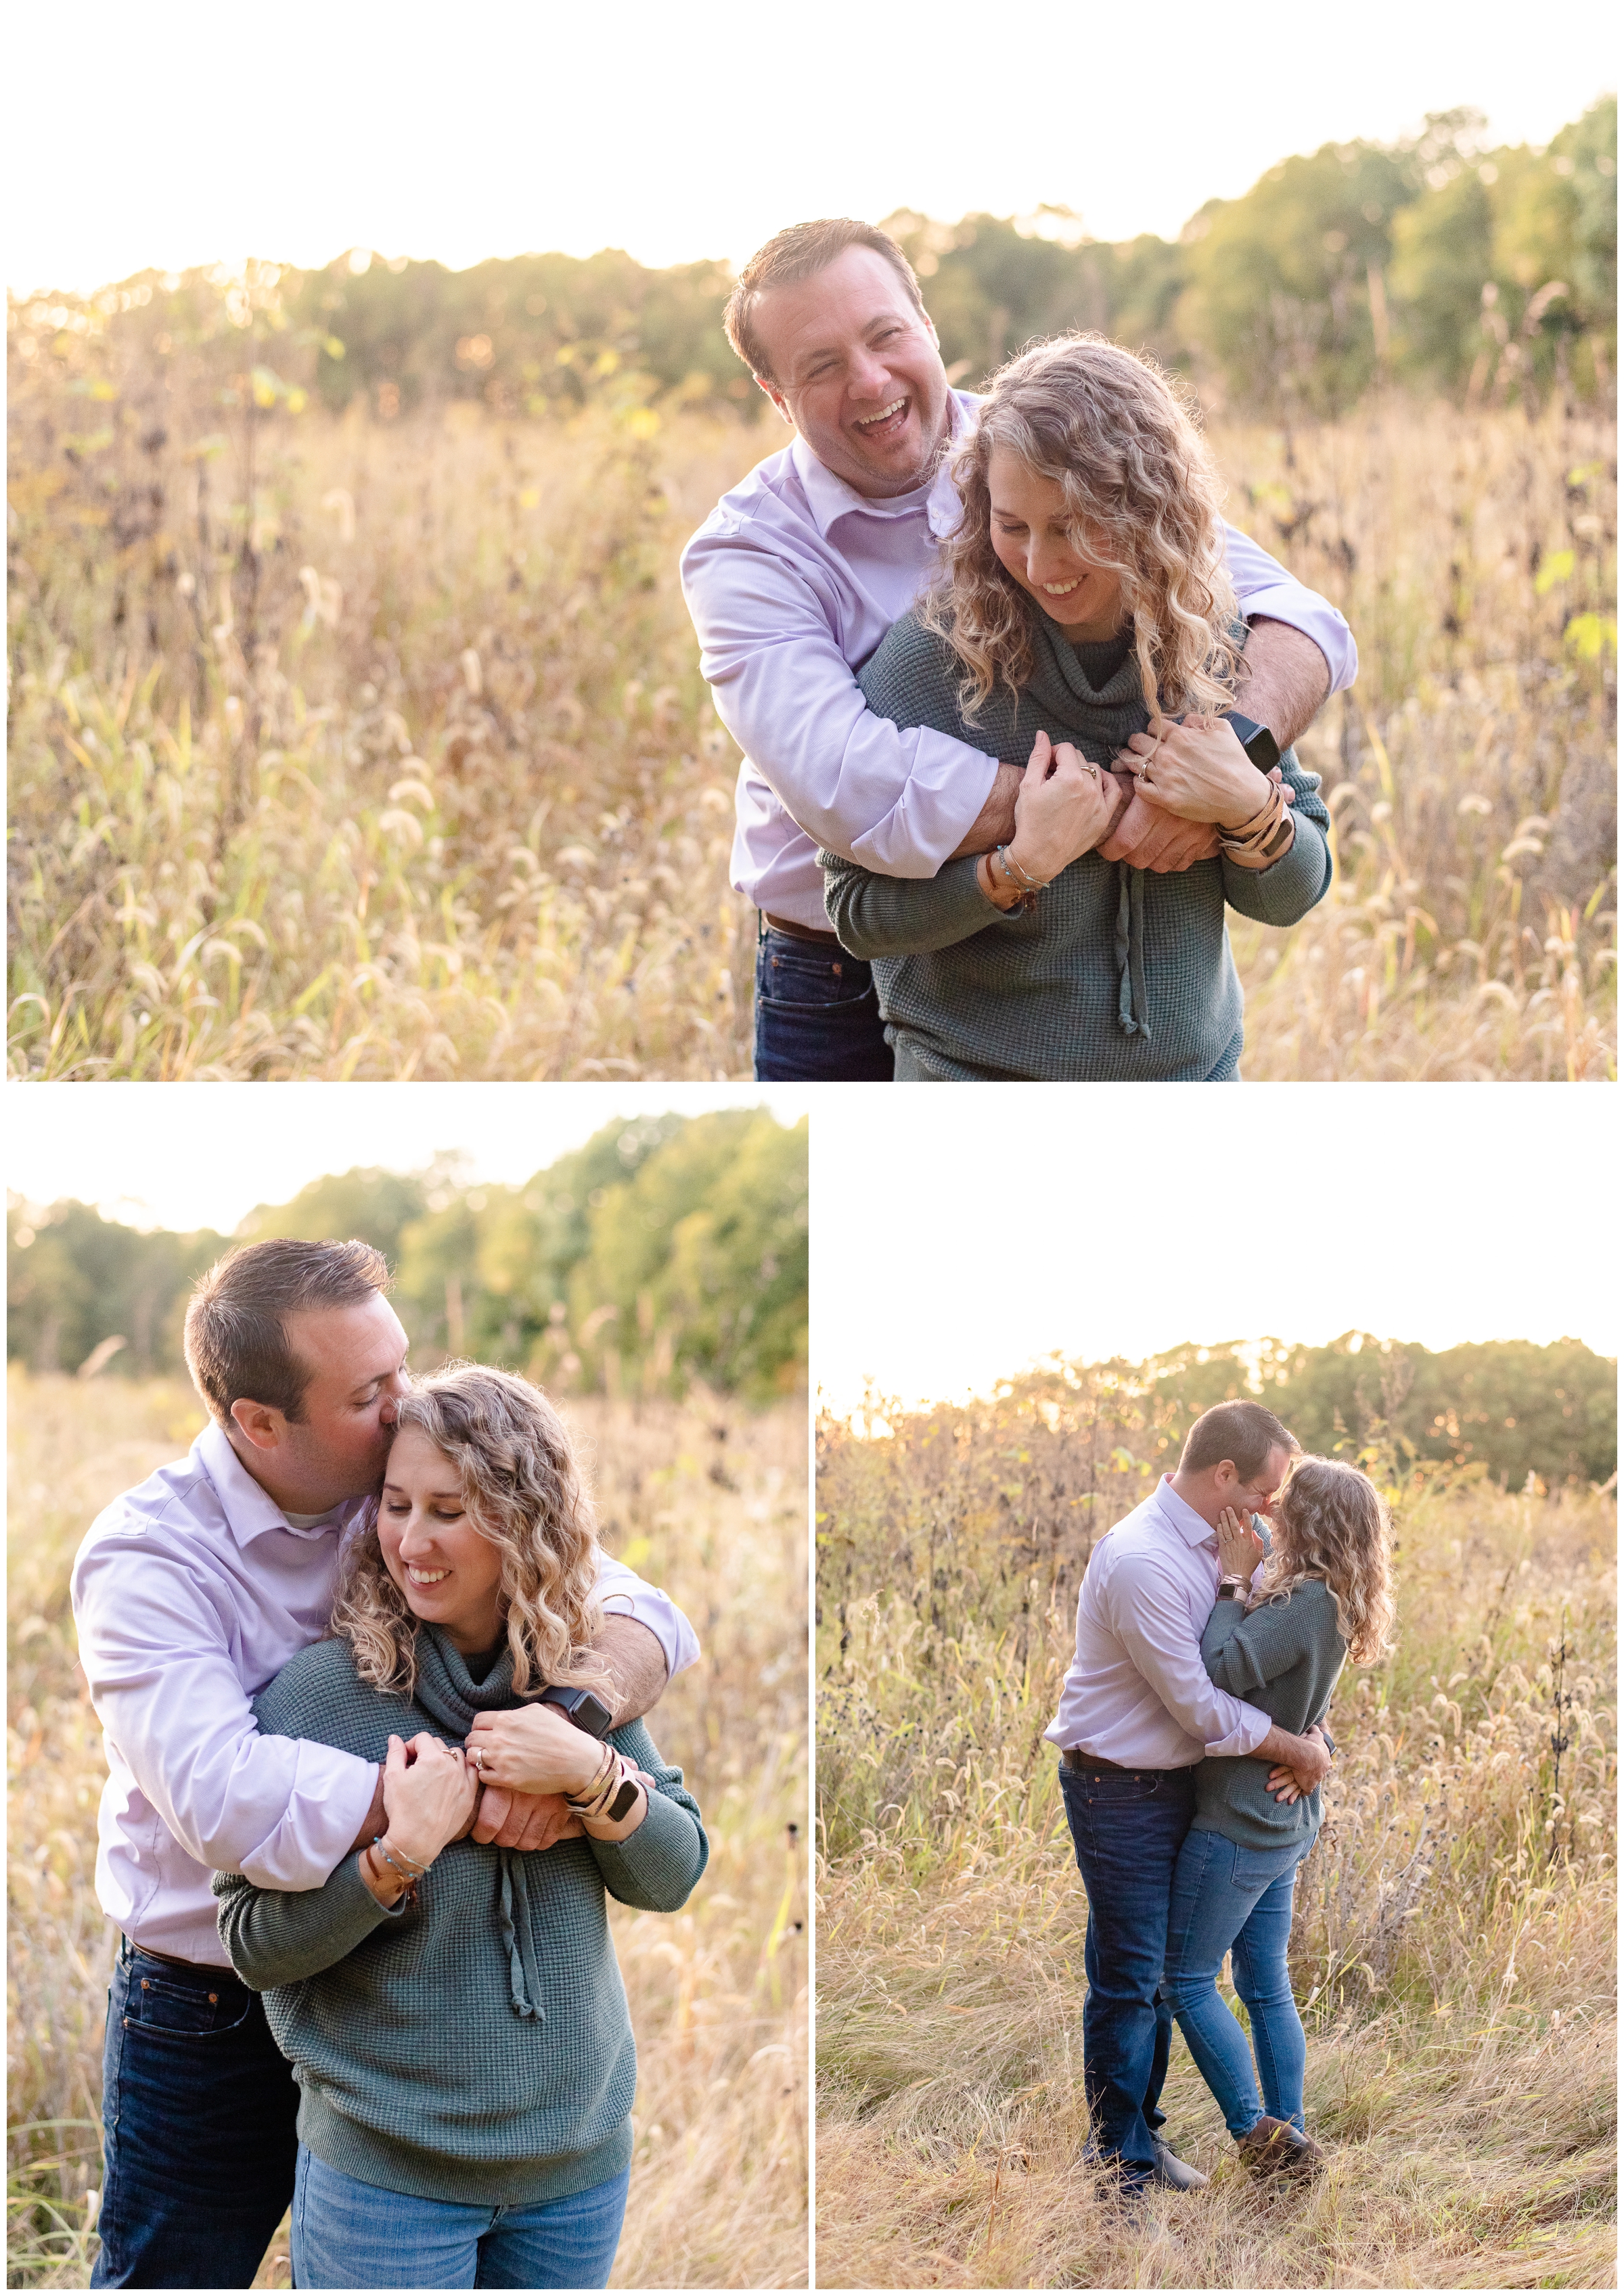 Husband and wife Fall photos